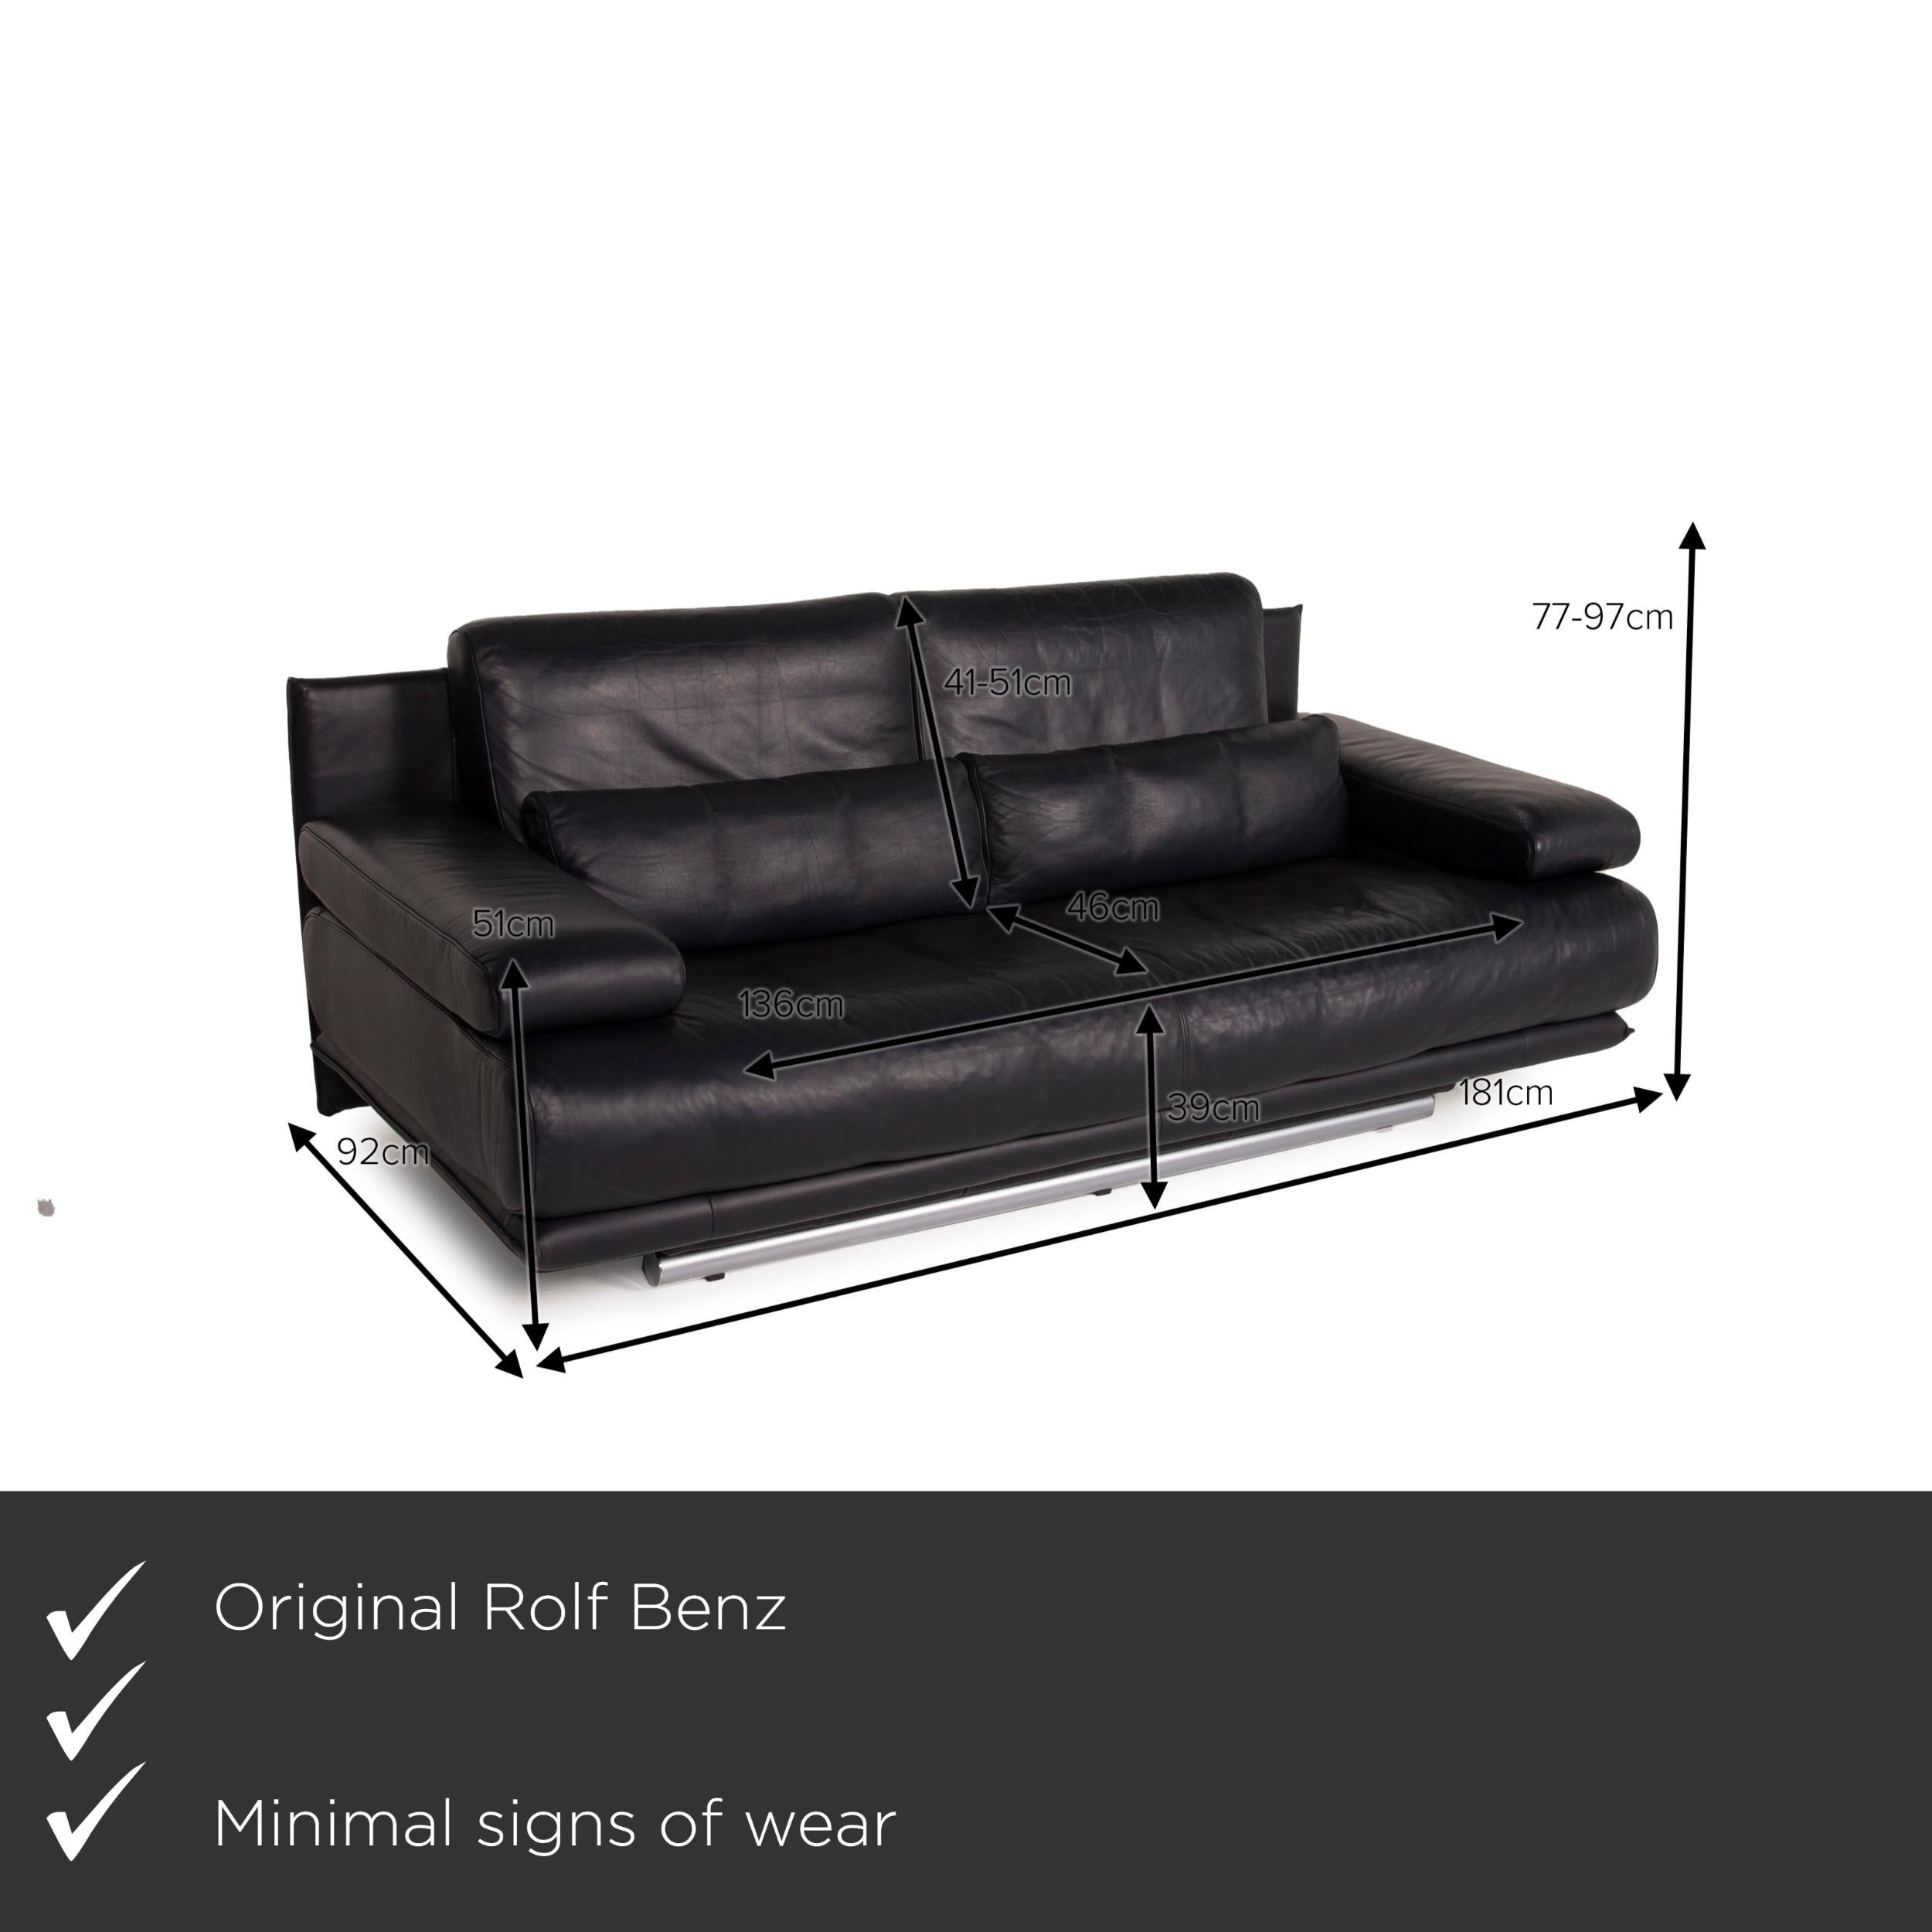 We present to you a Rolf Benz 6500 leather sofa dark blue two-seater function.


 Product measurements in centimeters:
 

Depth: 92
Width: 181
Height: 77
Seat height: 39
Rest height: 51
Seat depth: 46
Seat width: 134
Back height: 41.
 